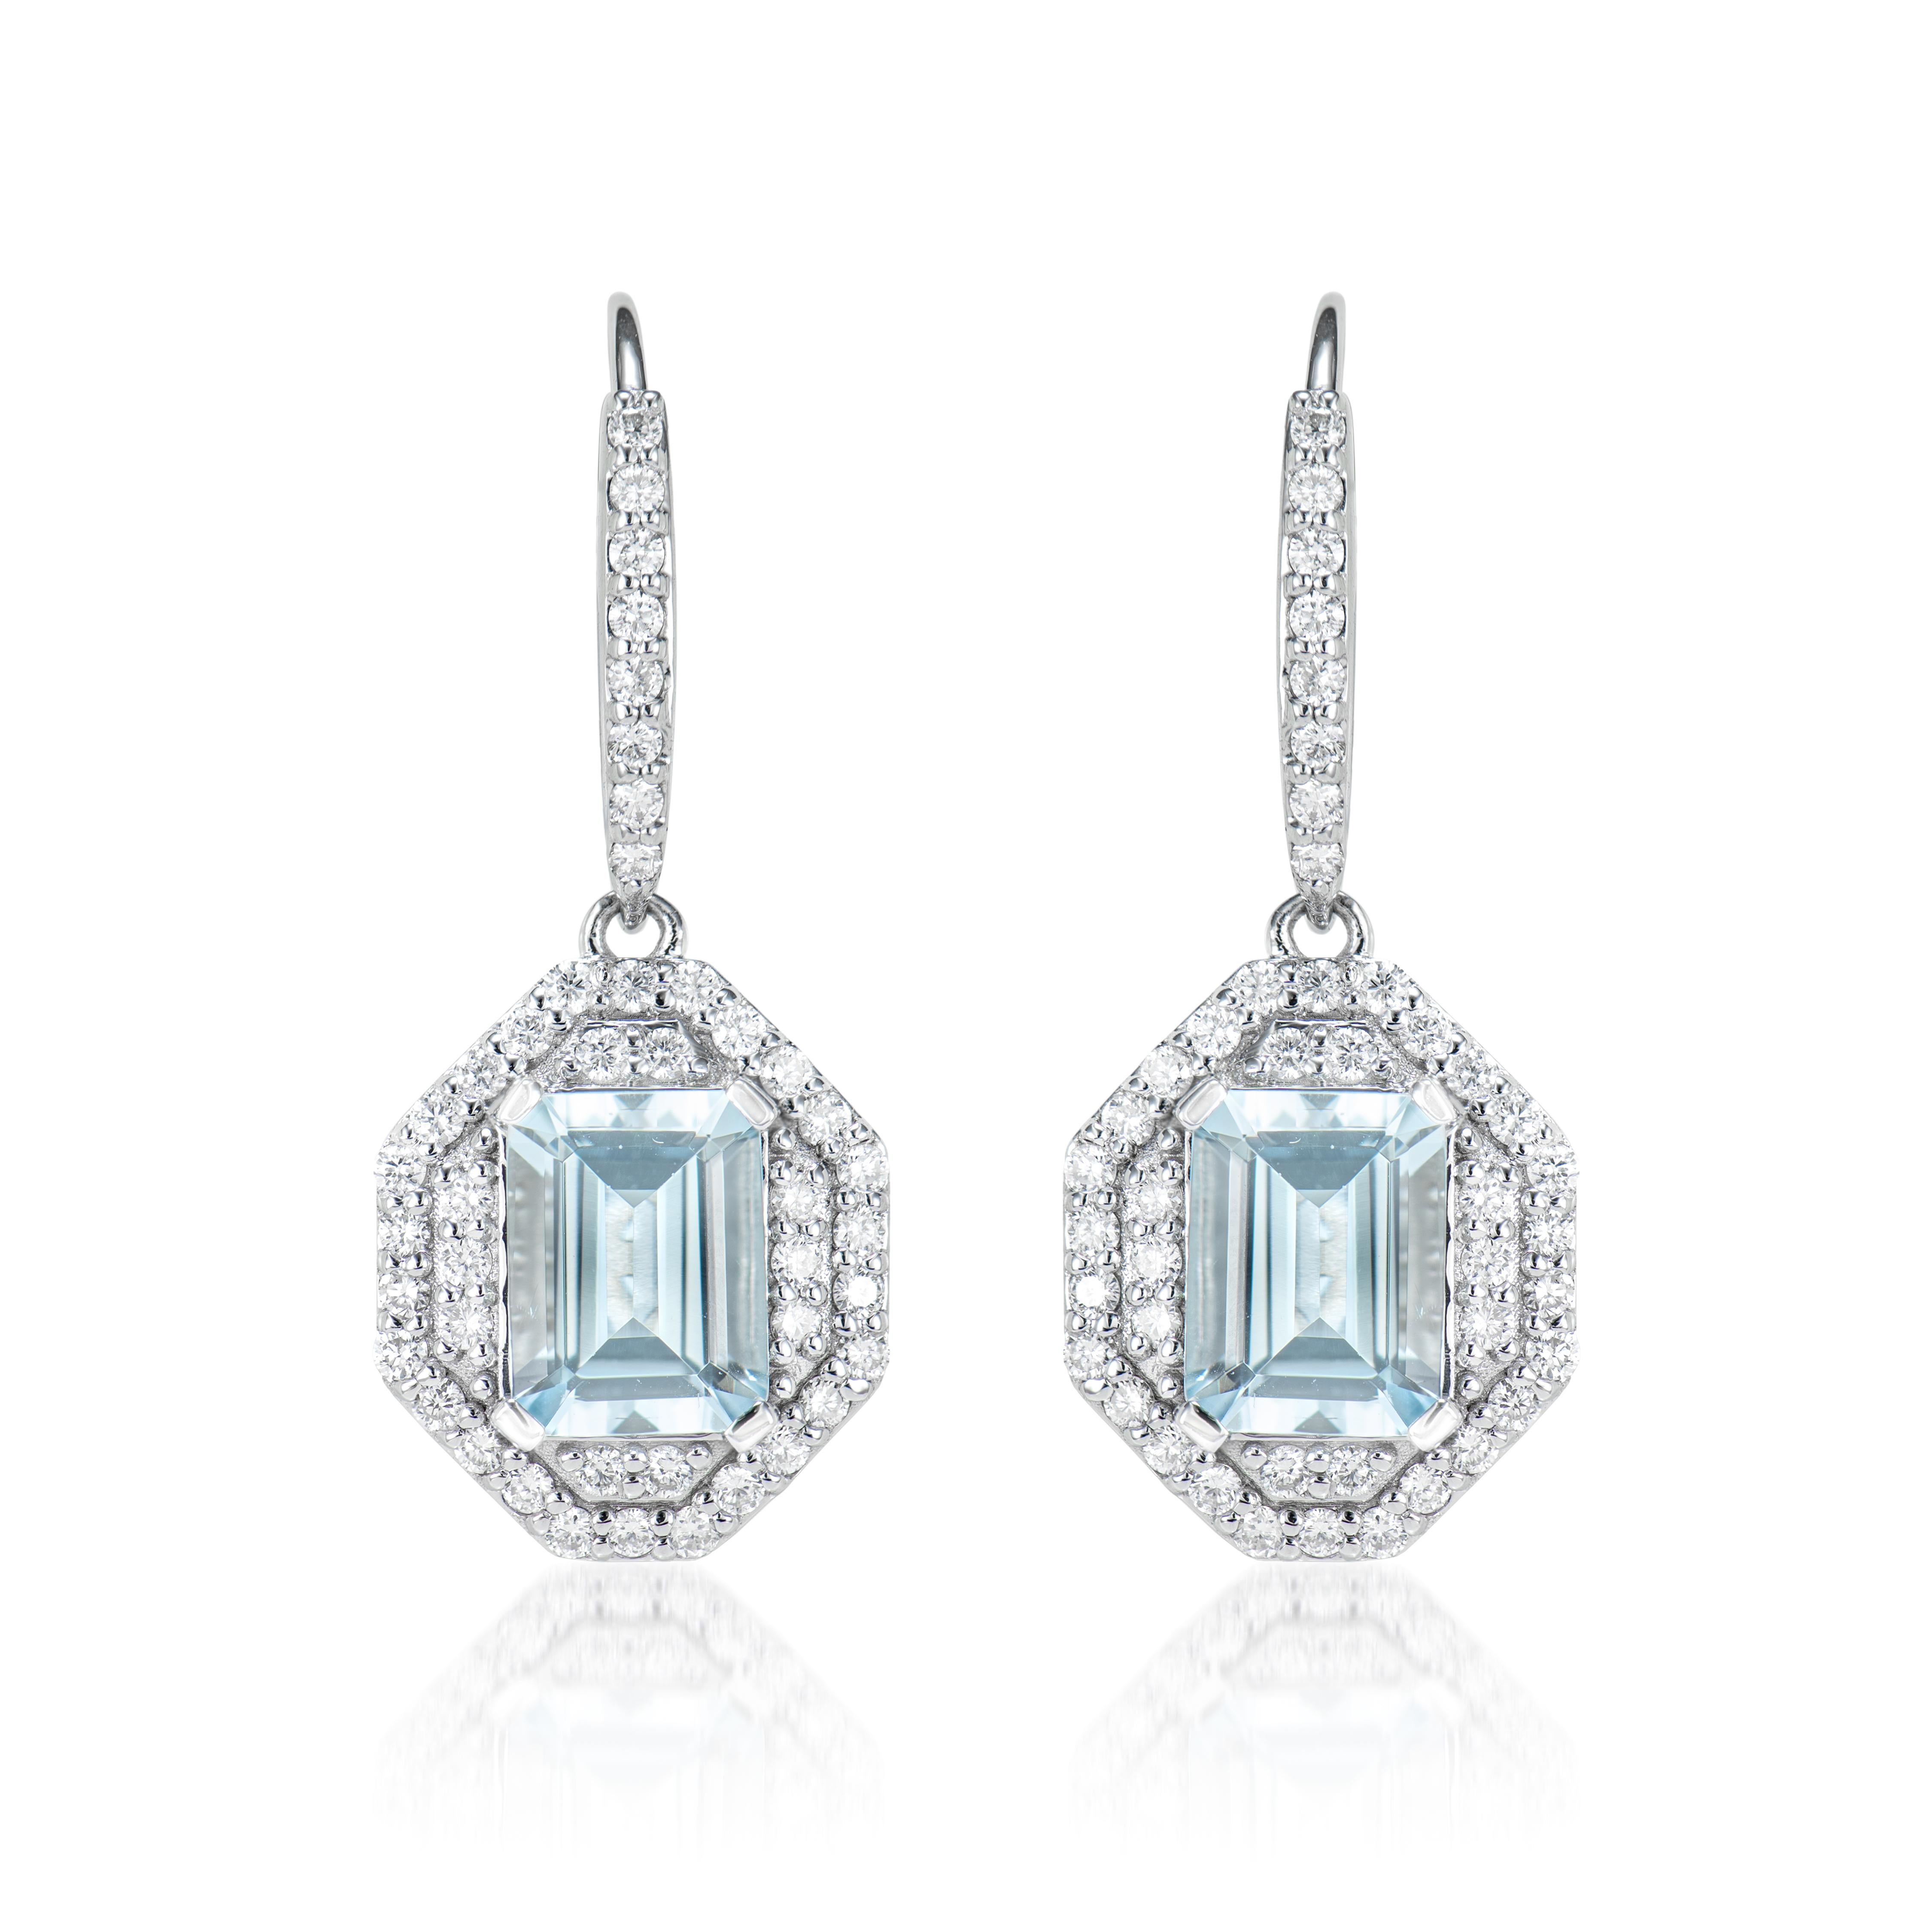 Contemporary 2.62 Carat Aquamarine Drop Earrings in 18 Karat White Gold with Diamond. For Sale